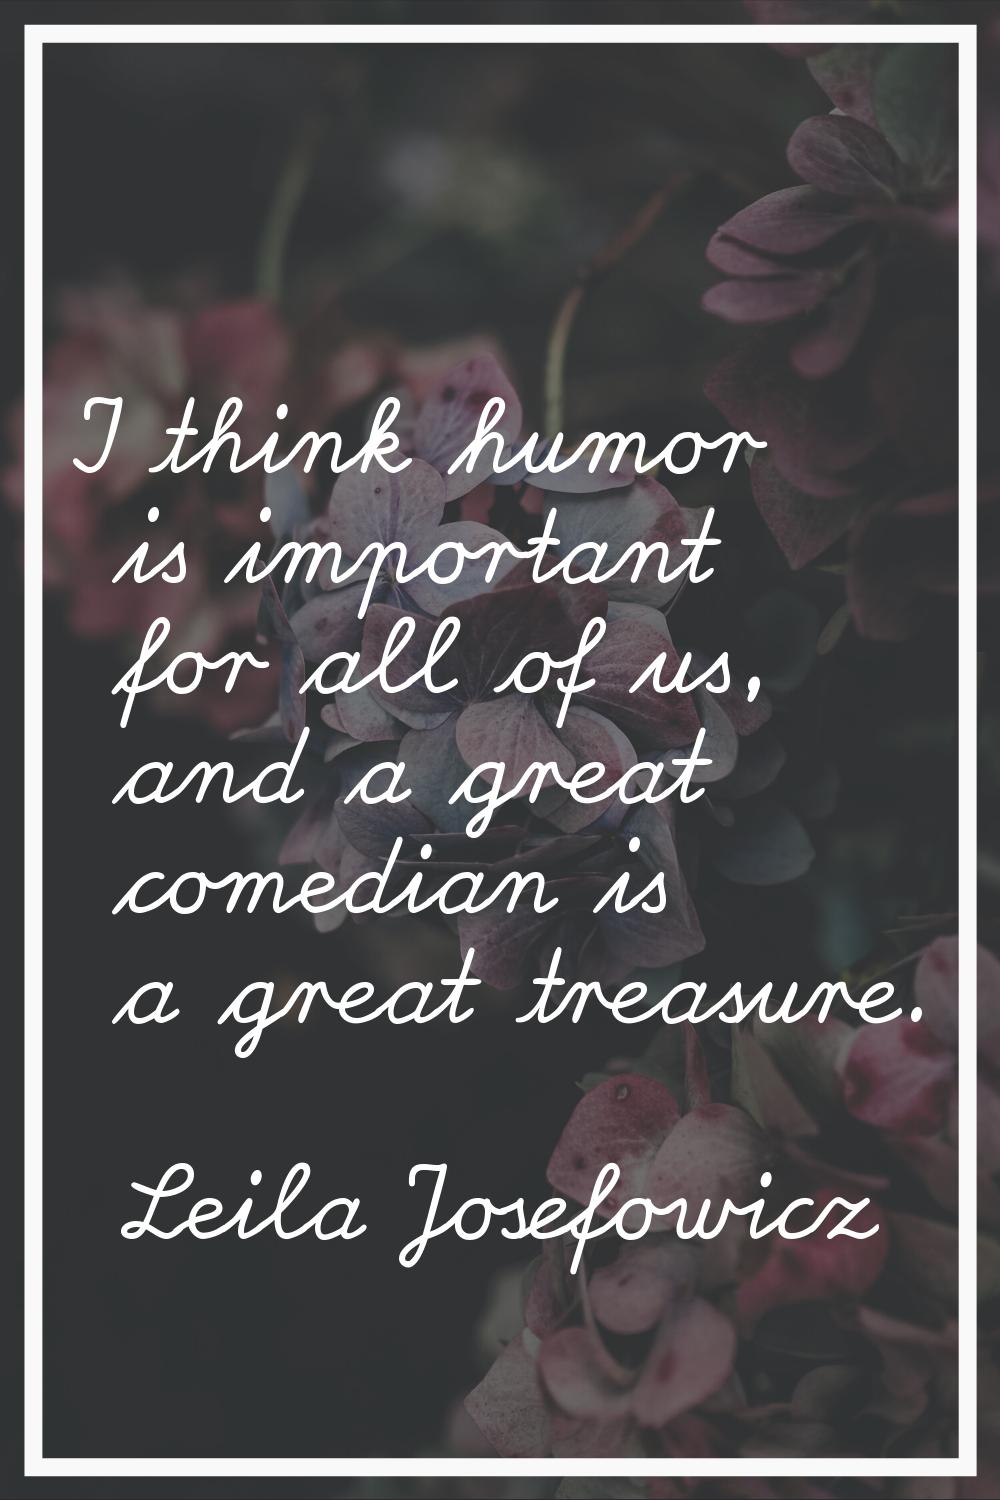 I think humor is important for all of us, and a great comedian is a great treasure.